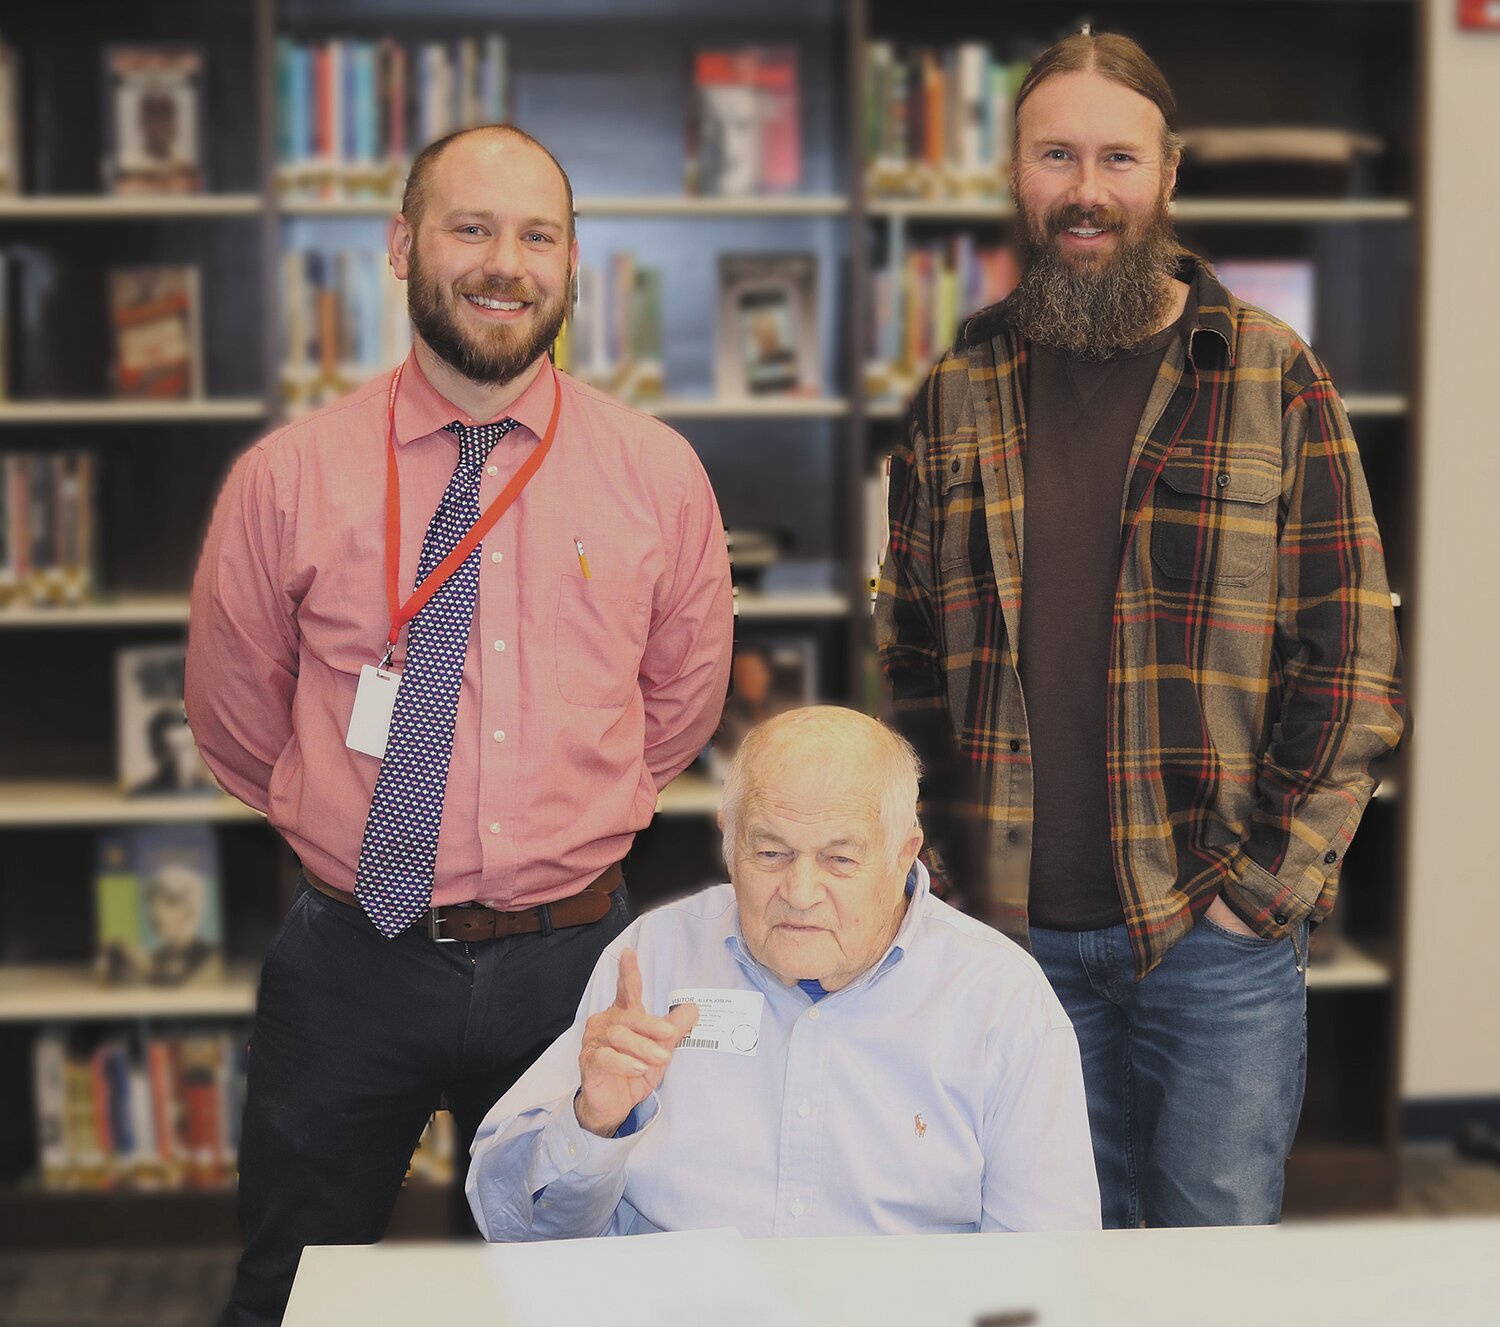 Joe Allen, seated, made a recent visit to North Montgomery High School. He is pictured with Andrew Showers, left, and Kevin Brooks. Allen is a Crawfordsville native who was a capsule communicator tasked with sending messages from the ground to the Apollo 11 moon landing crew, which included Neil Armstrong, Michael Collins and Edwin “Buzz” Aldrin. Allen was on the astronaut support crew for Apollo 15 in 1971 and returned to space aboard the Discovery in 1984. After retiring from NASA, he led a commercial space company and was chair of a defense contractor. He resided in Washington, D.C. for many years, then returned to Crawfordsville, where he now resides.